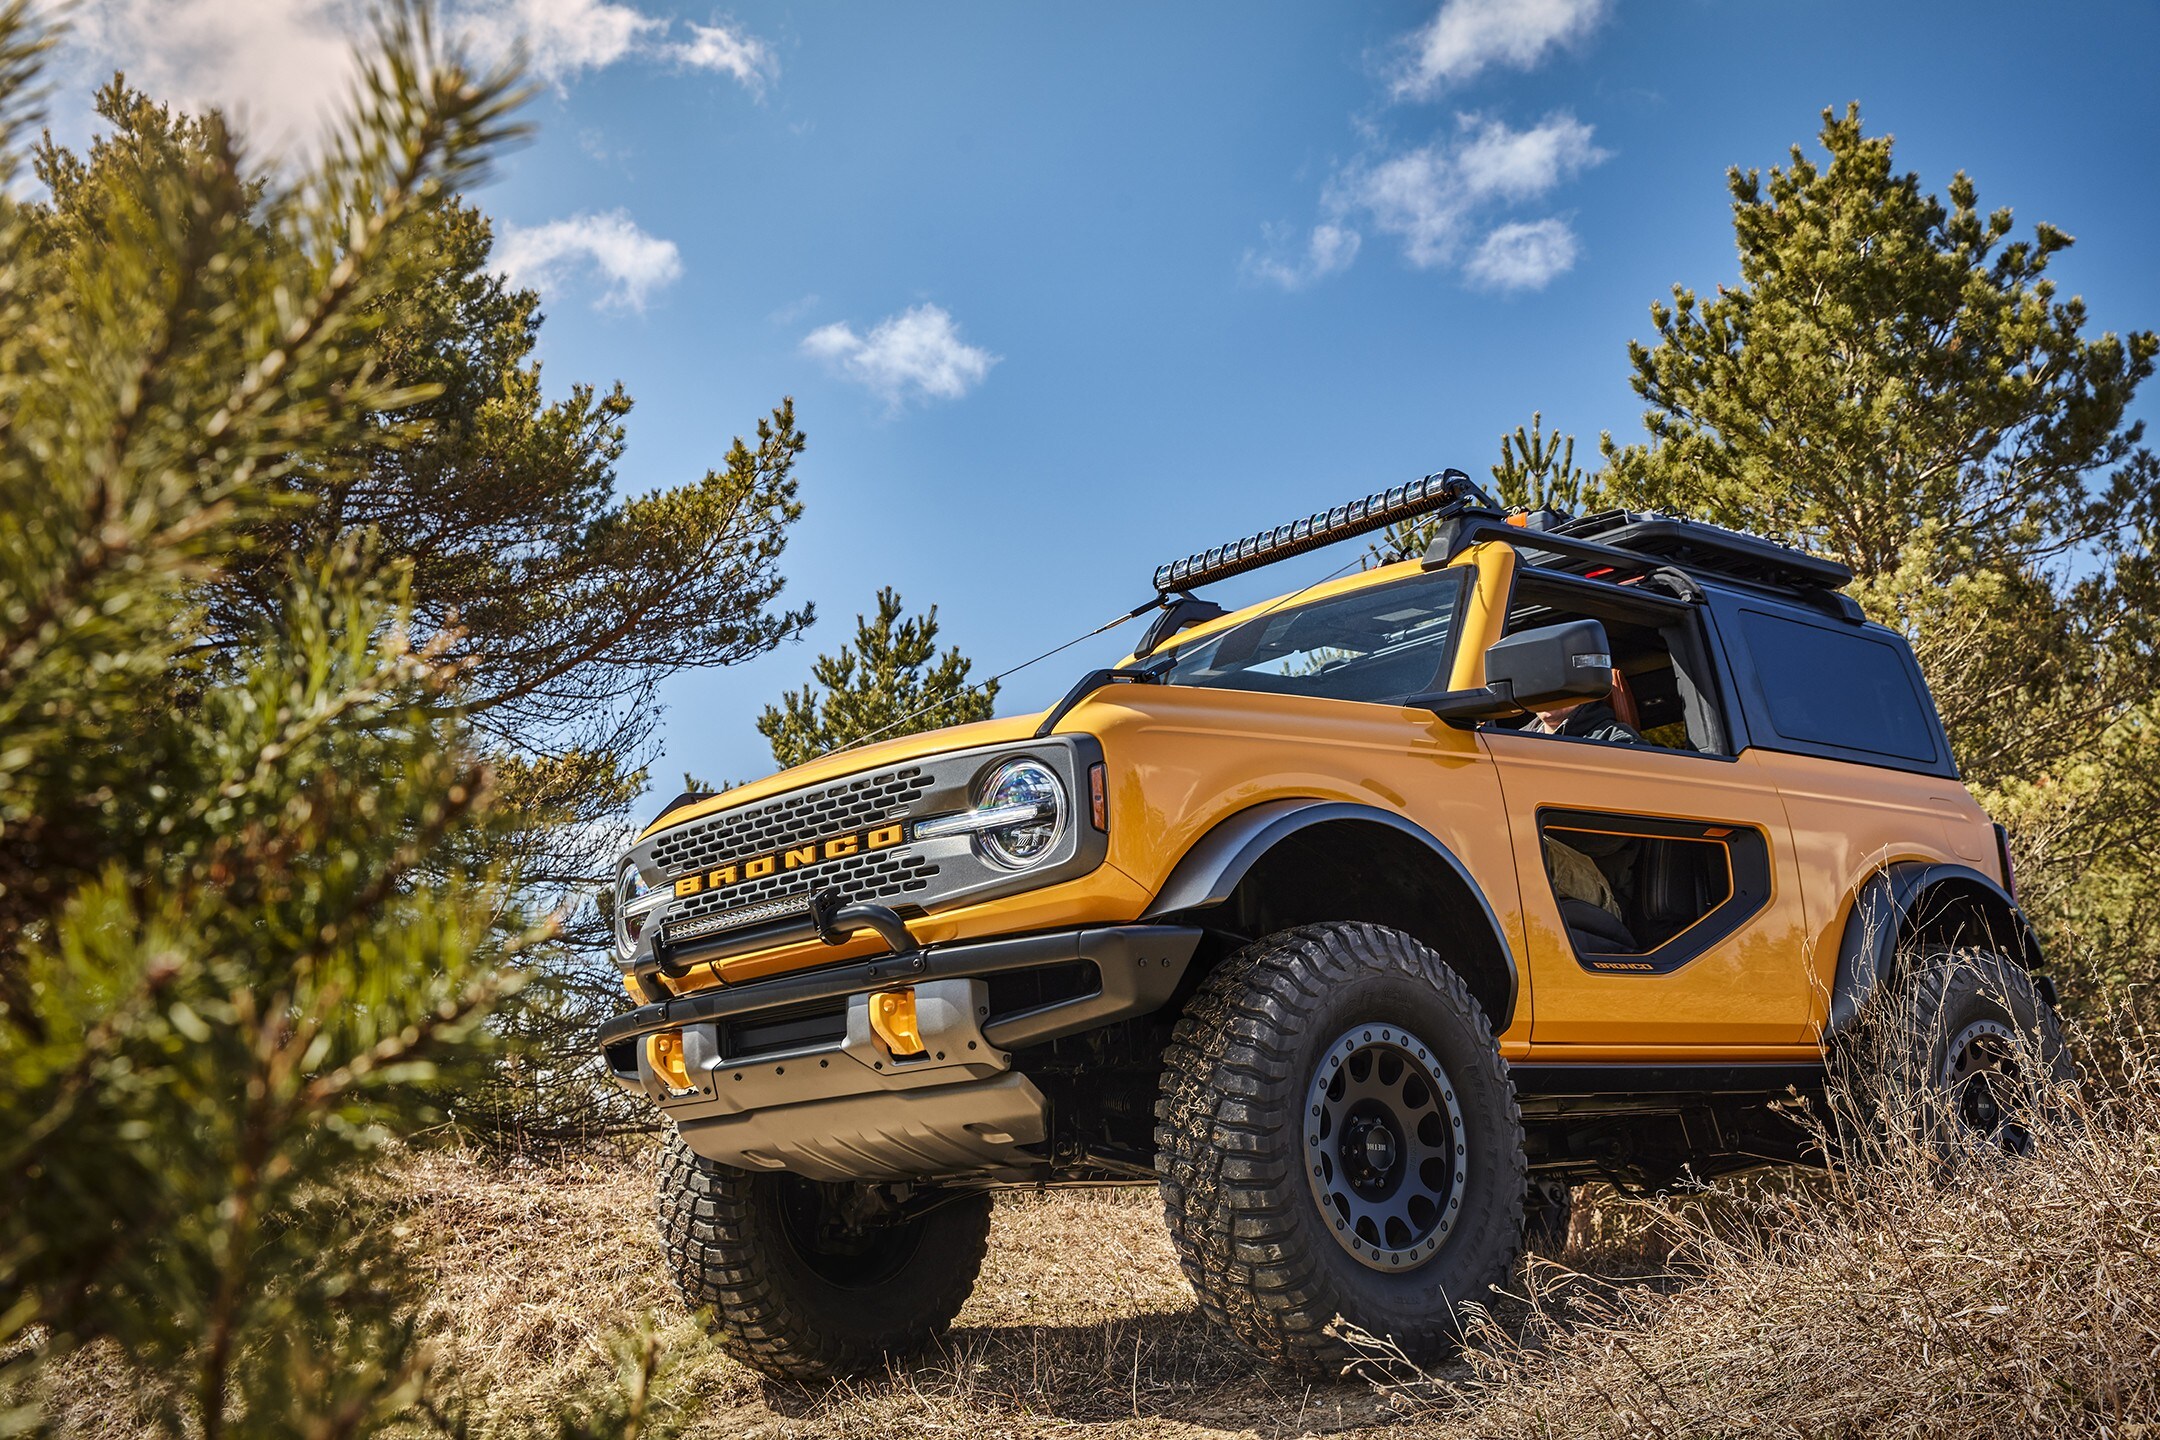 The 2022 Ford Bronco in Cyber Orange shown on a trail